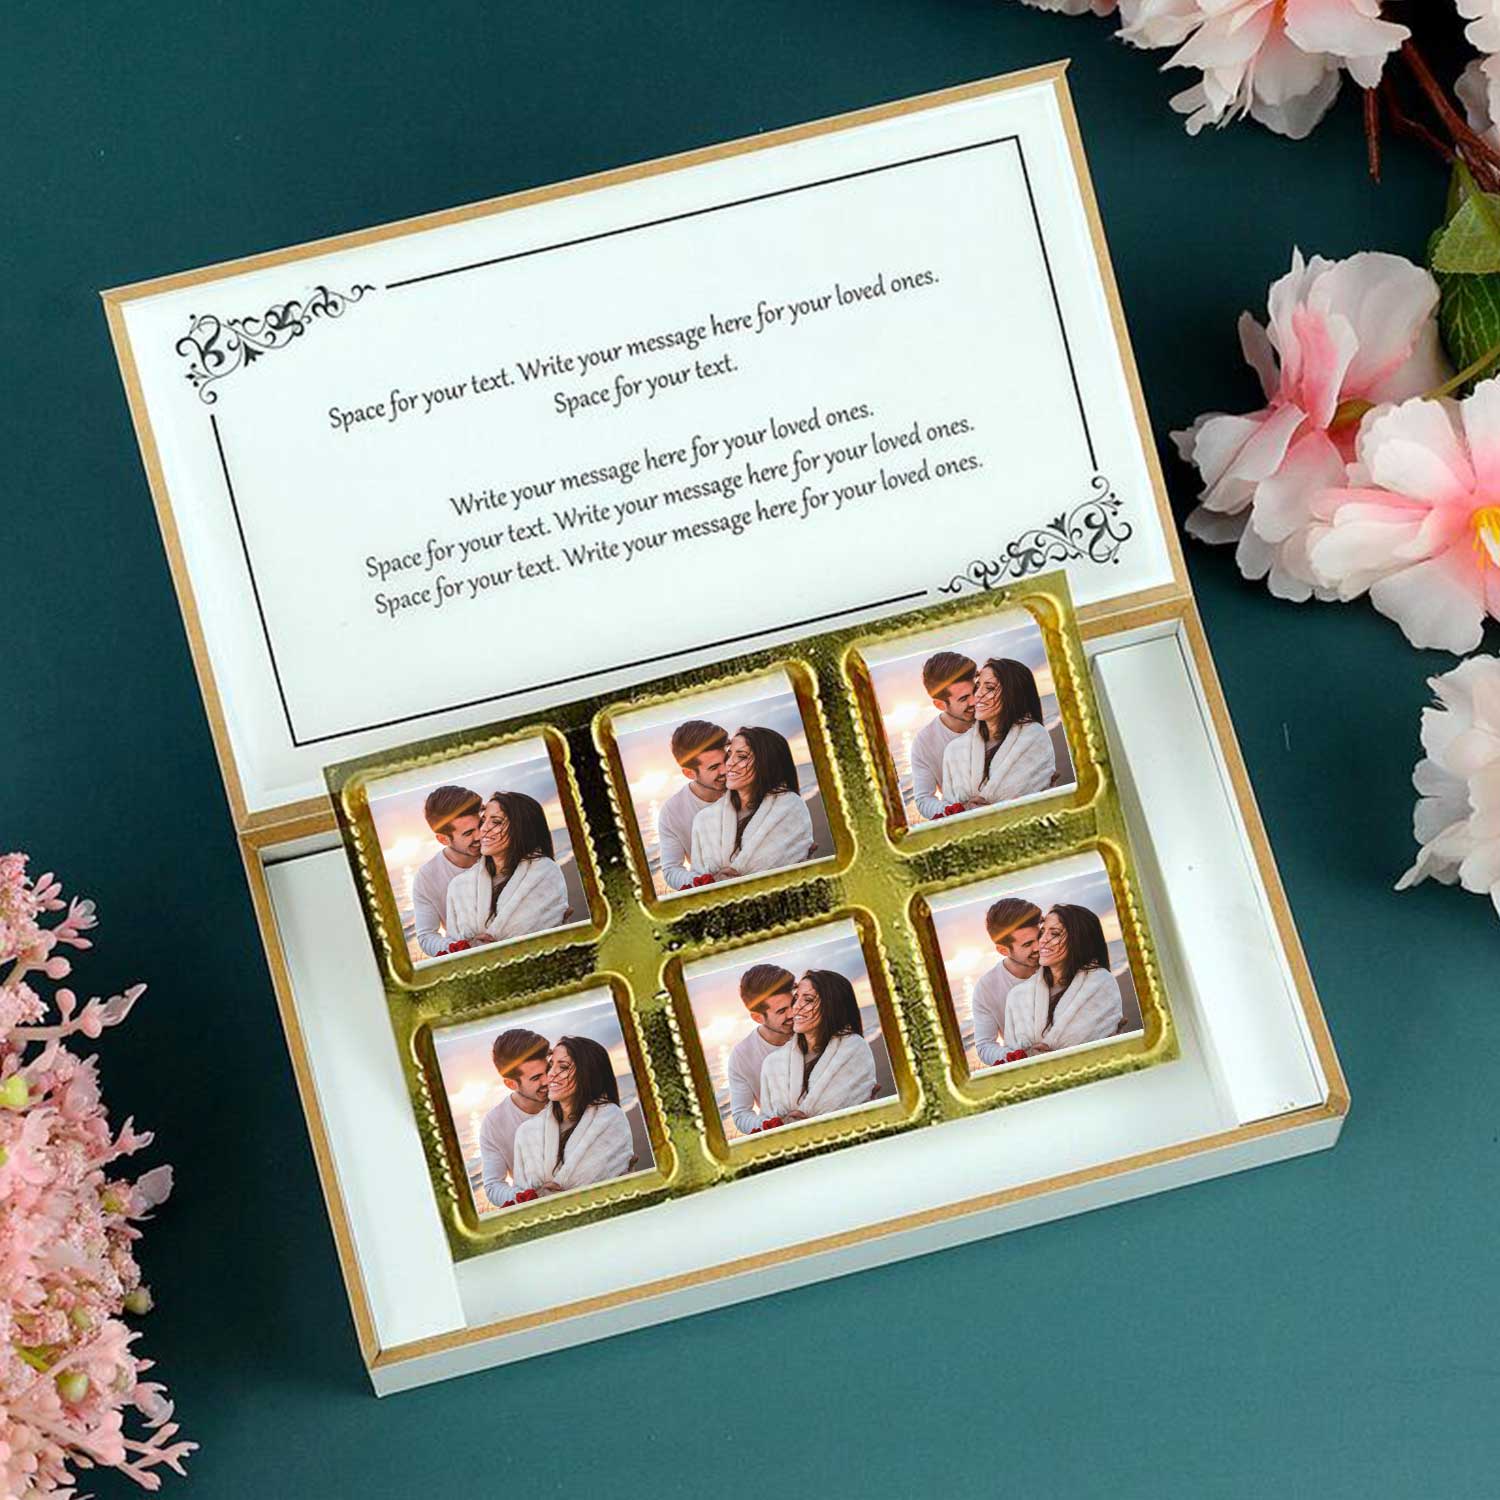 Wedding invitation gift boxes india.  Wedding card with chocolate box price.  Chocolate for wedding gift.  Wedding card gift box ideas.